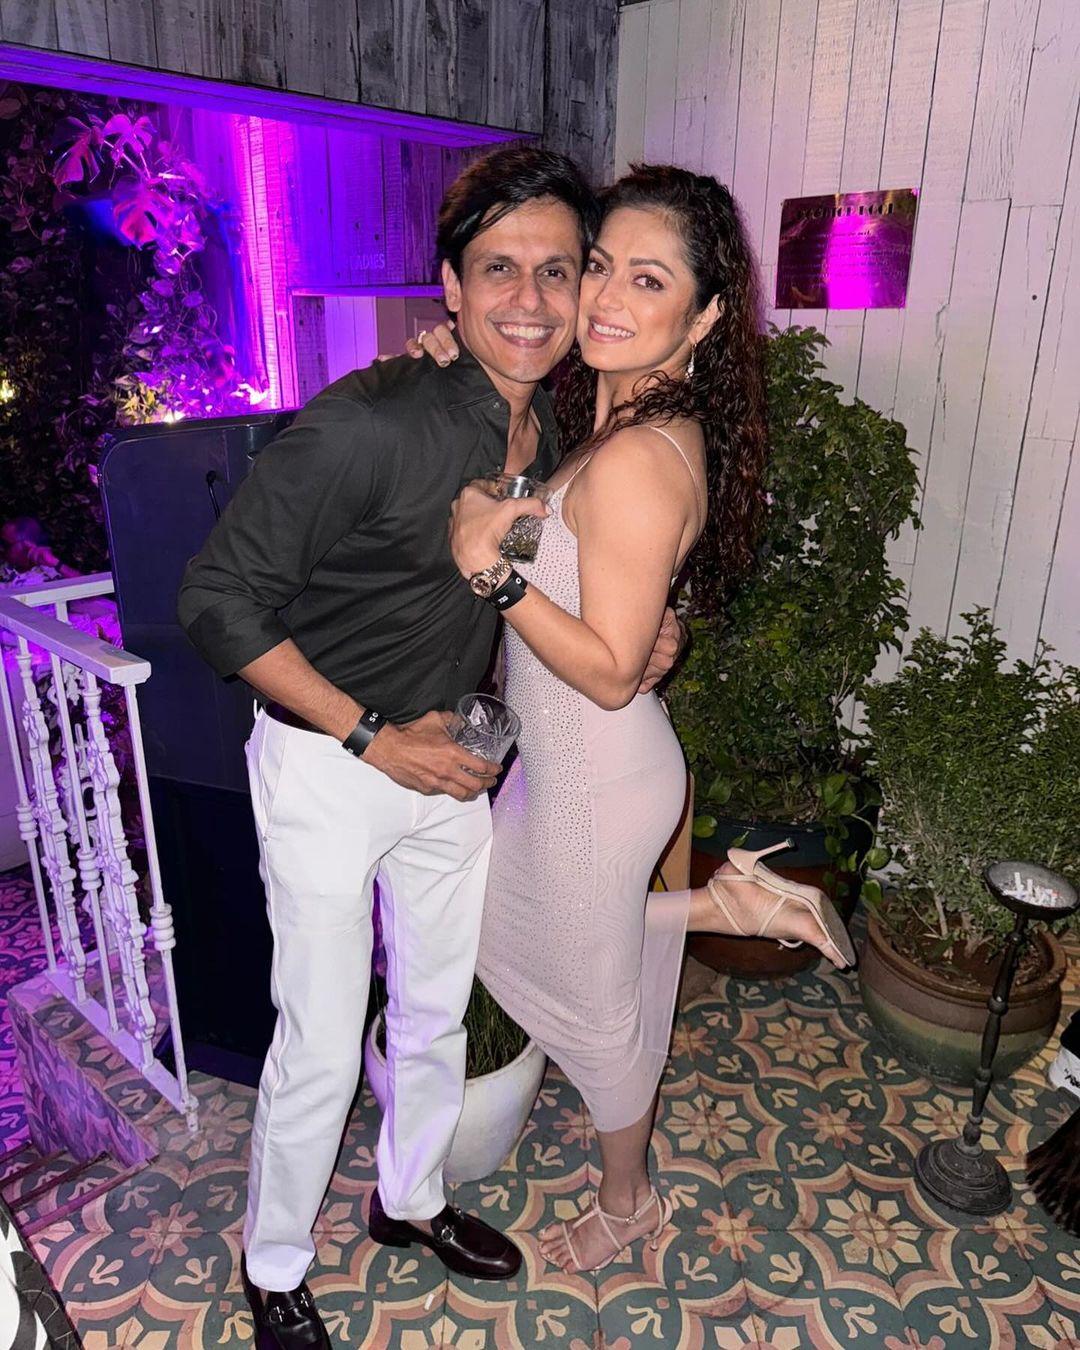 Drashti Dhami was no exception, the popular actress was seen hugging the love of her life as she dropped the pictures from their New Year celebration